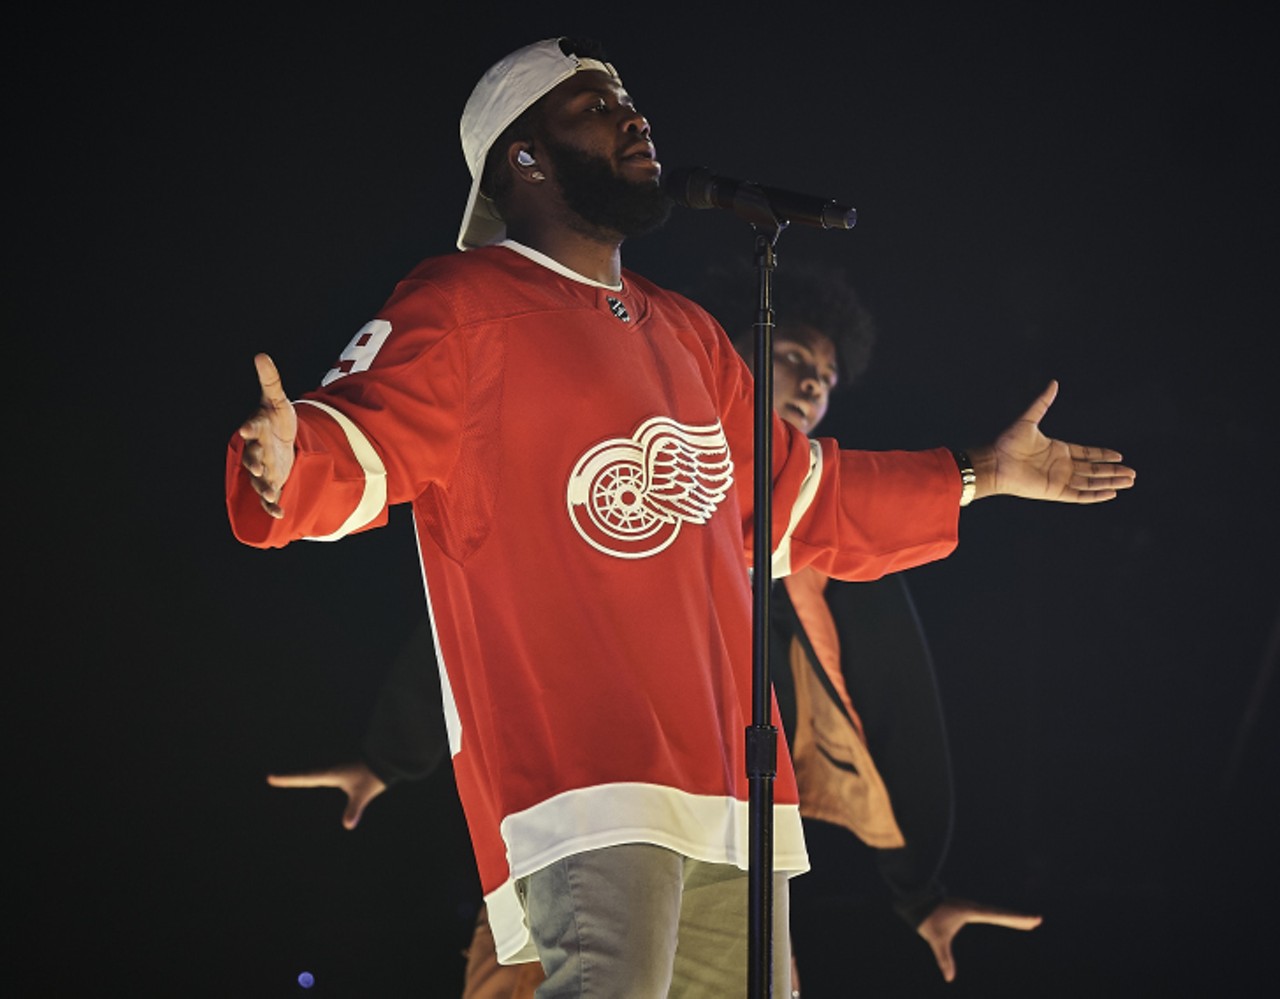 Everything we saw at the Khalid show at Little Caesars Arena